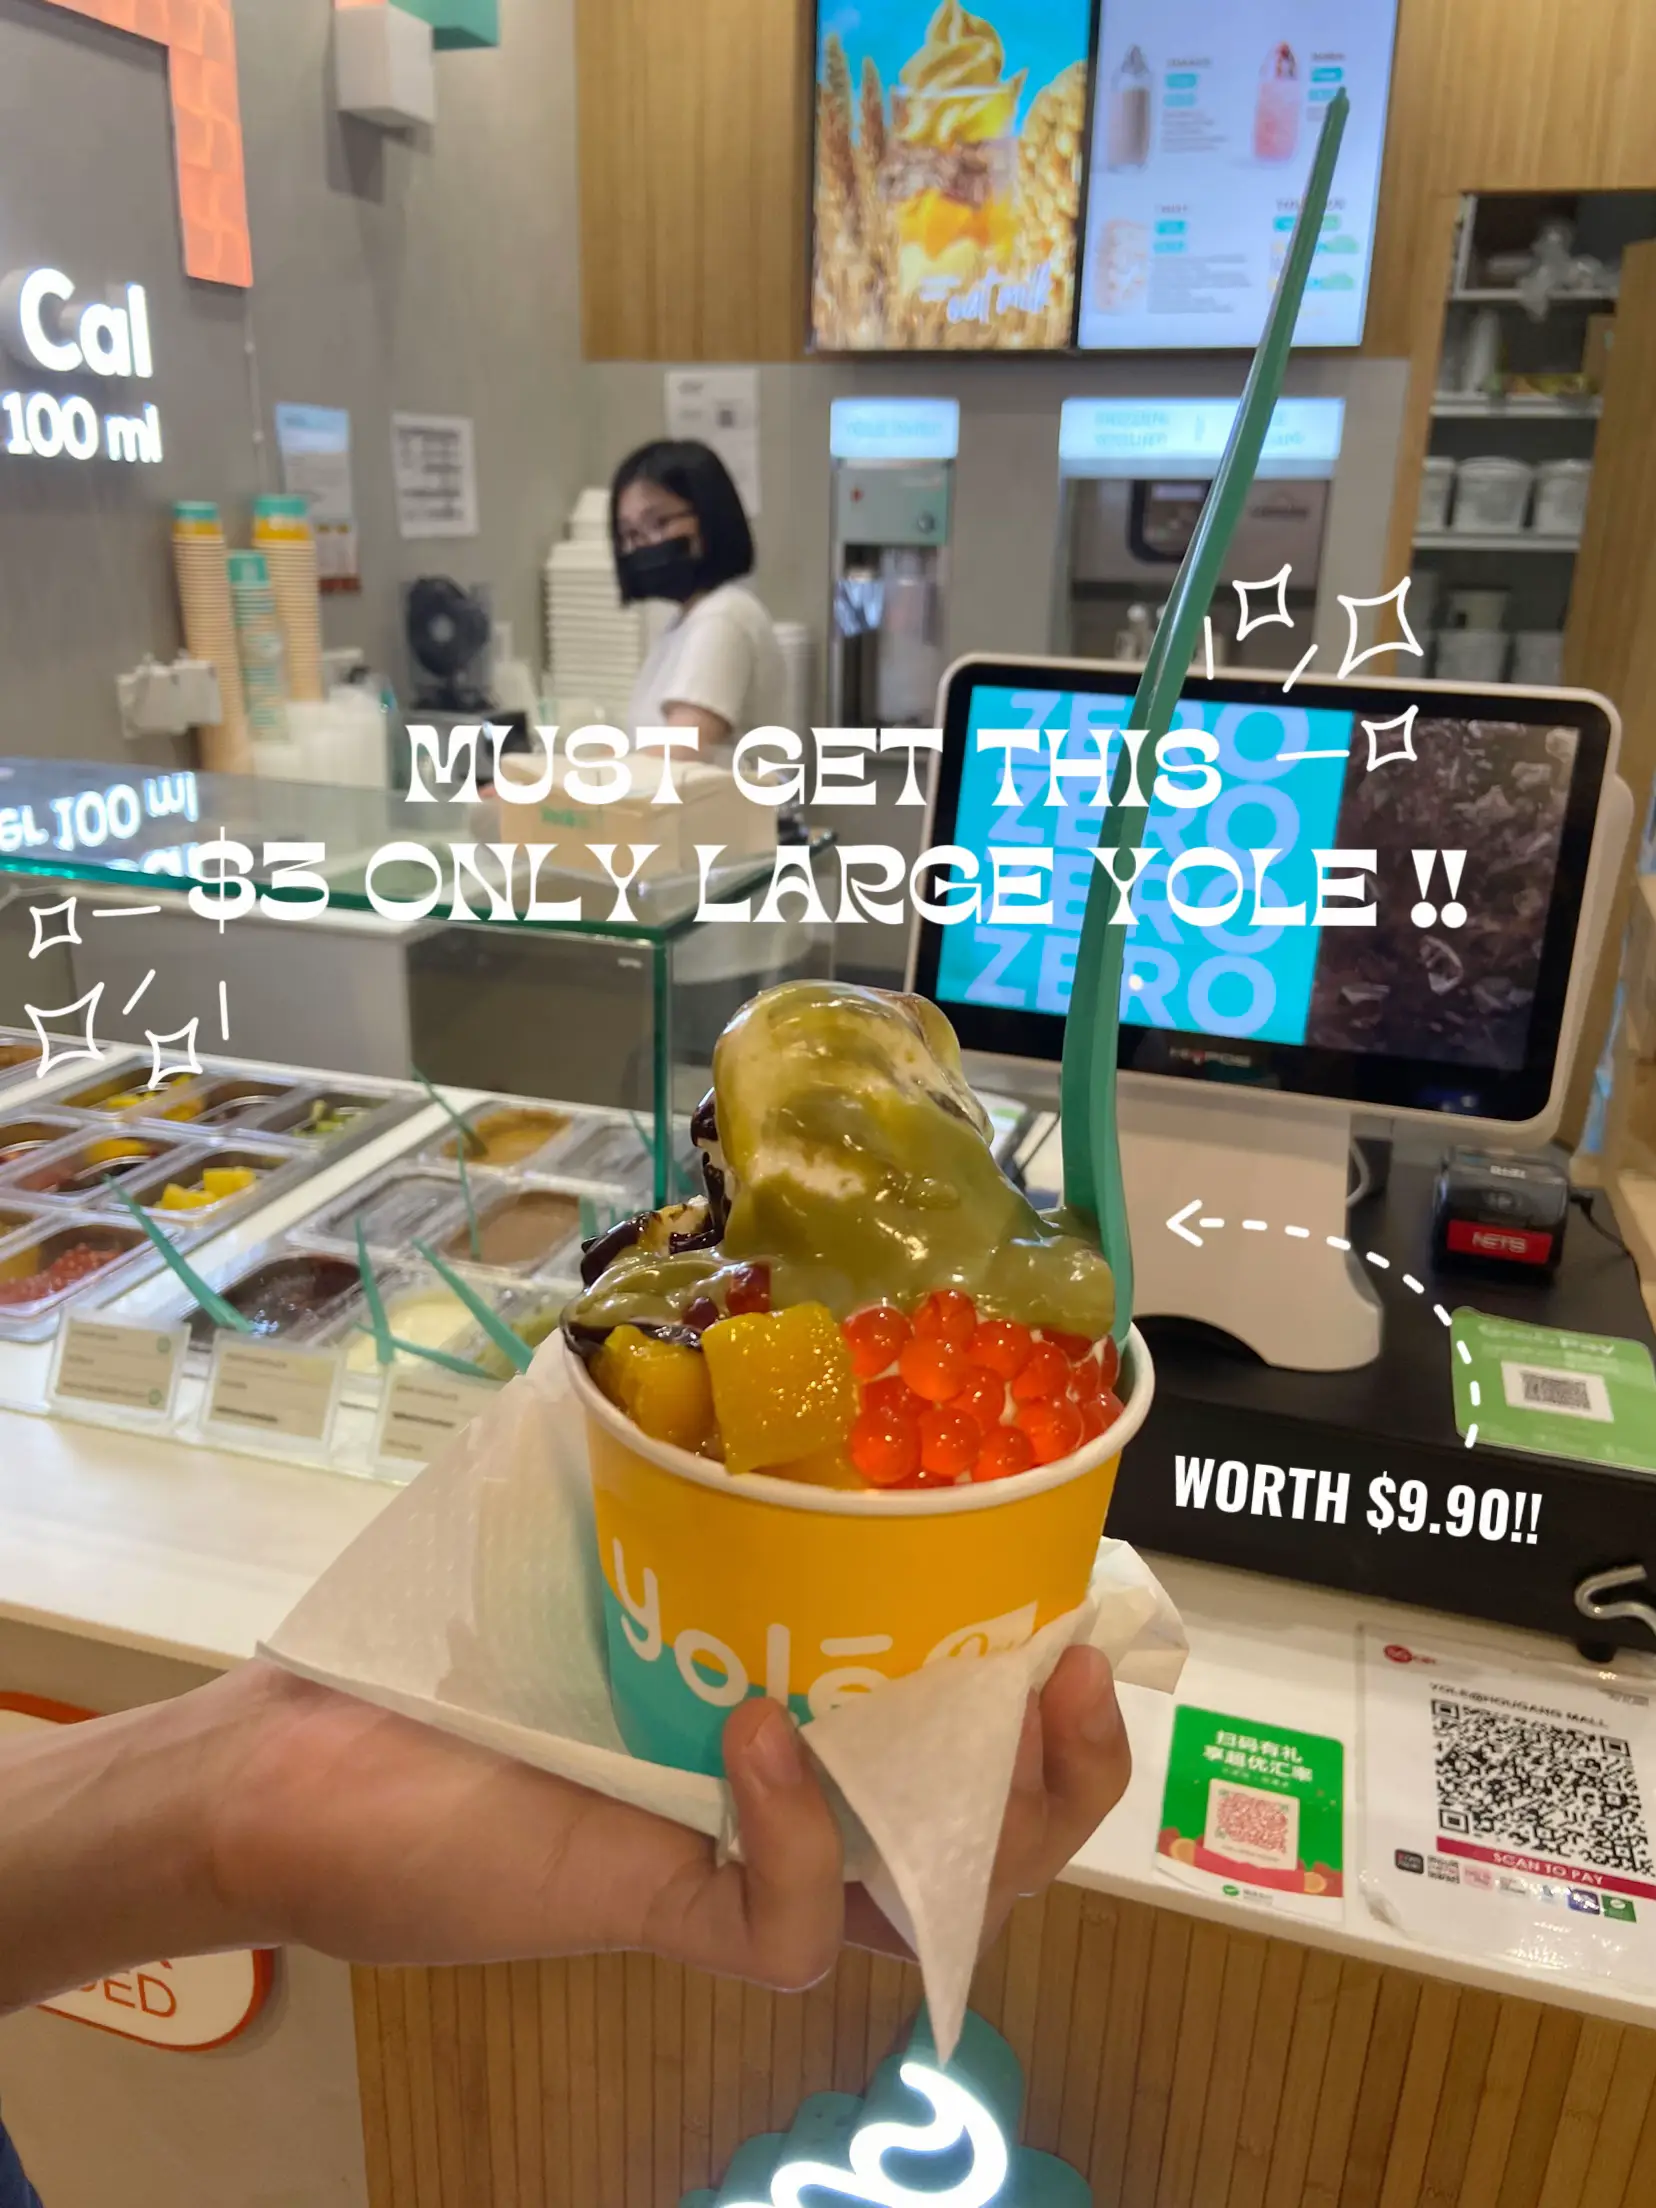 MUST GET THIS $3 ONLY LARGE YOLE !! (WORTH $9.90)🤯's images(0)